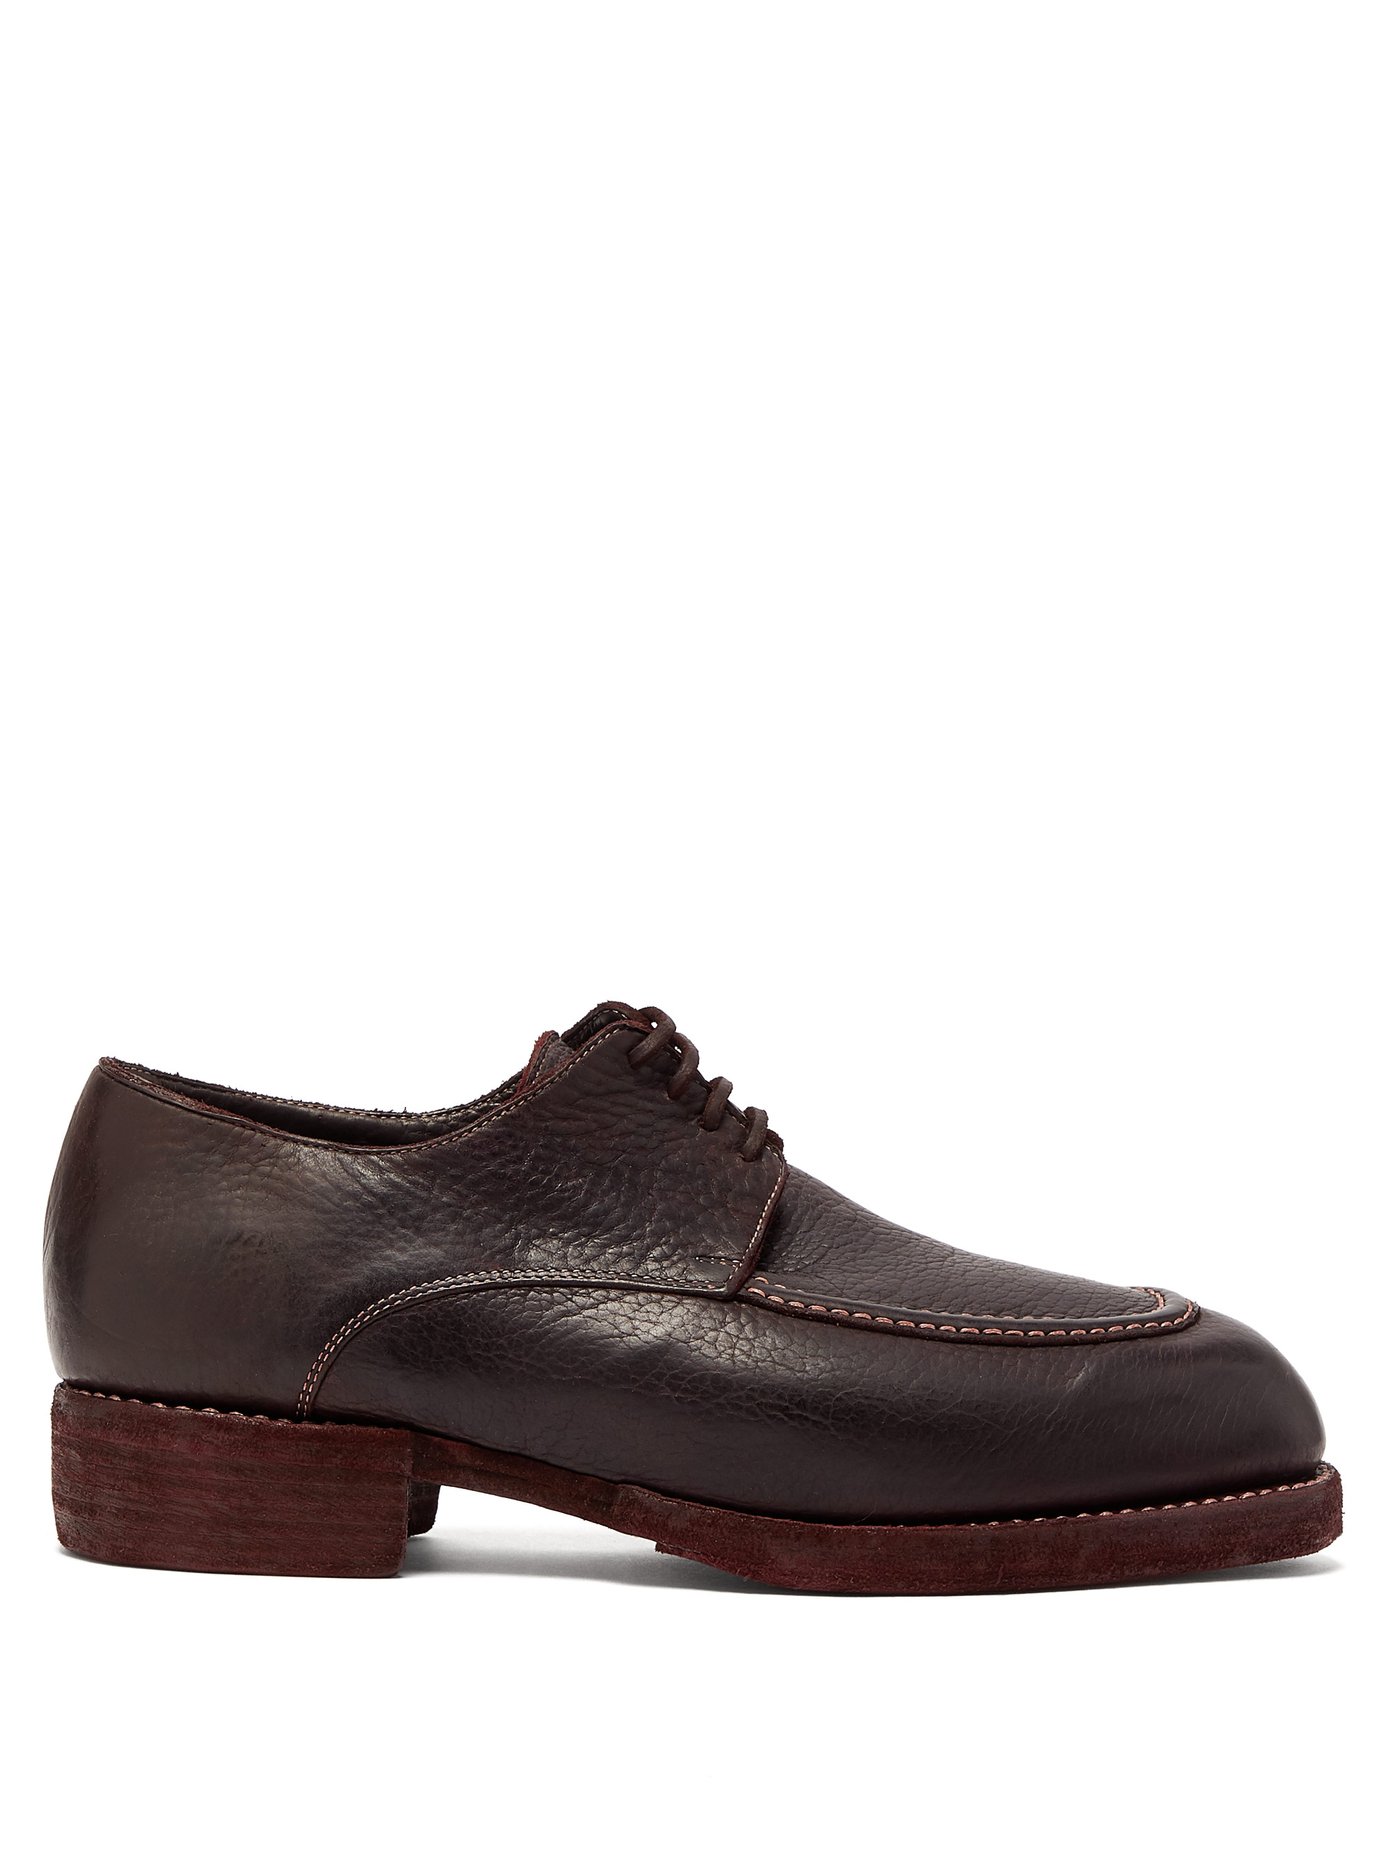 bison leather shoes